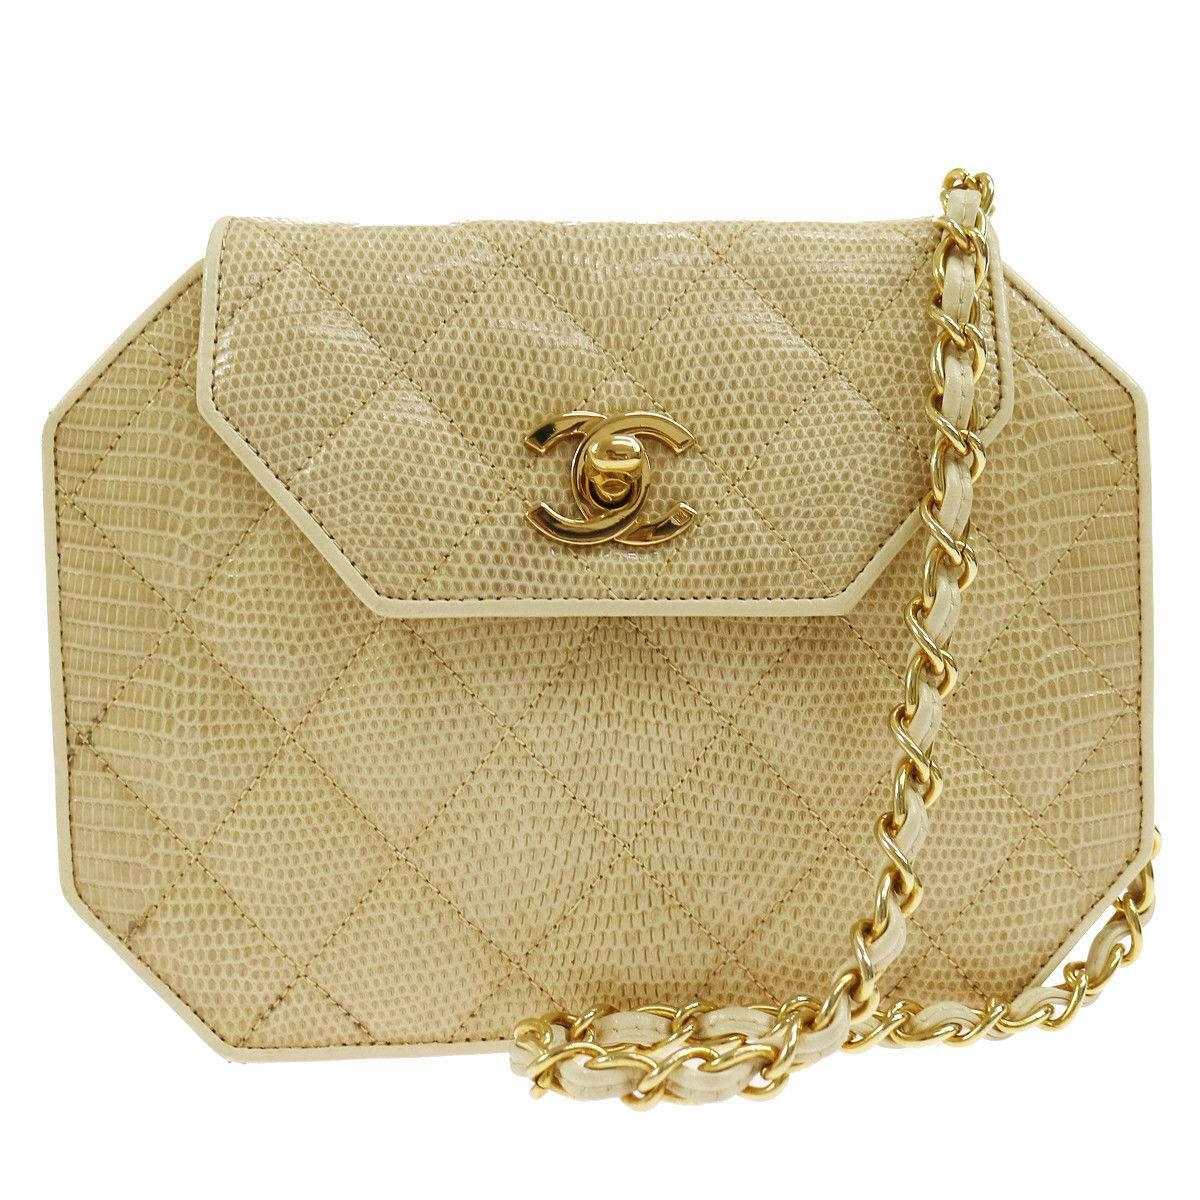 Chanel Nude Lizard Exotic Party Octagon 2 in 1 Clutch Evening Shoulder Bag